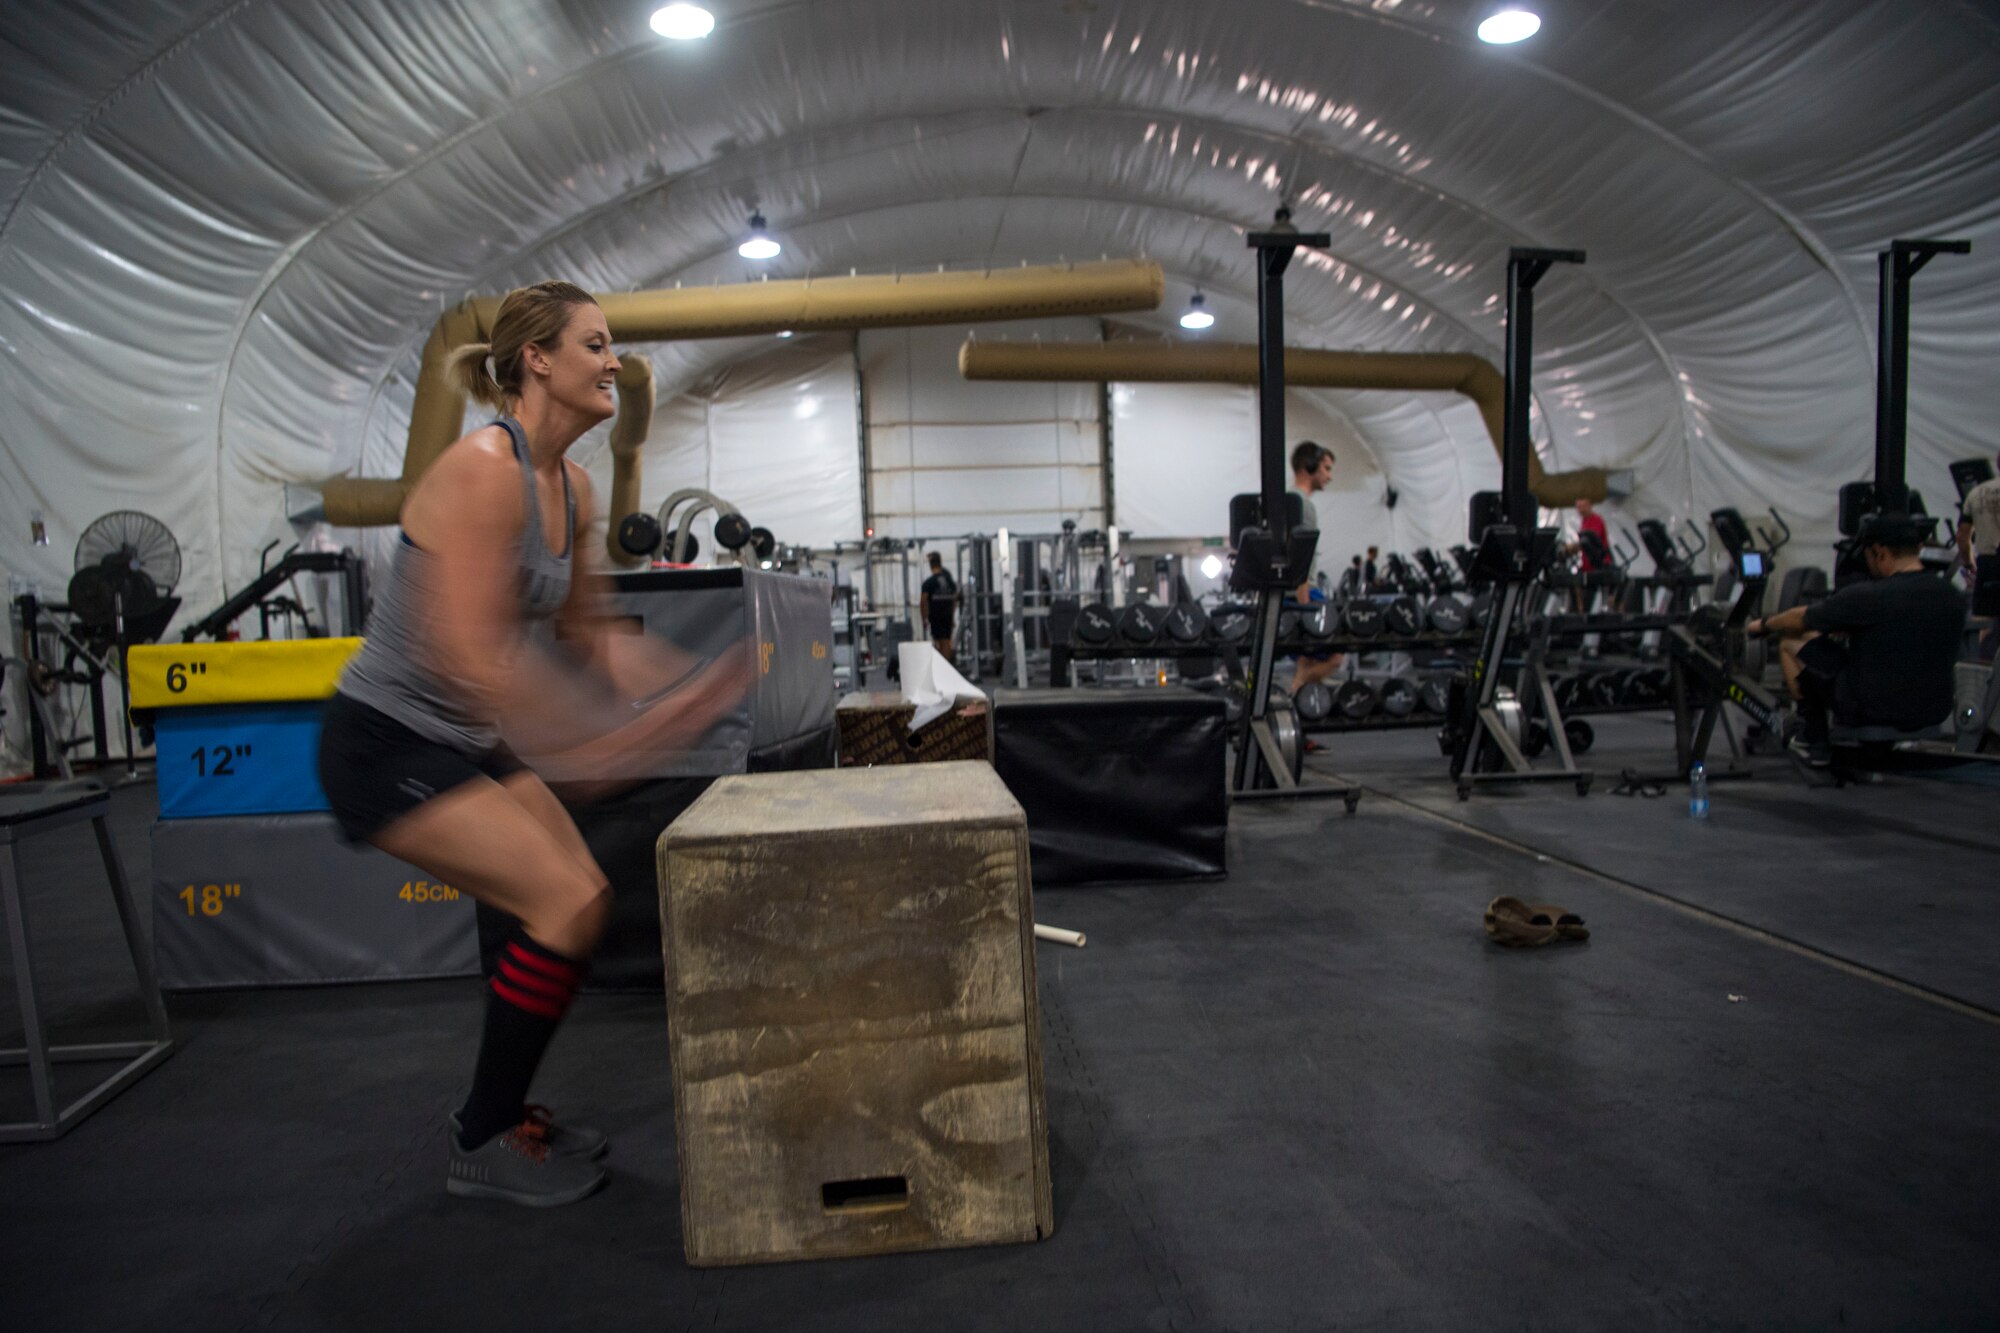 Master Sgt. Nikki Walberg, 386th Air Expeditionary Wing paralegal, executes a box jump during a workout at an undisclosed location in Southwest Asia, June 18, 2018. Walberg works out three times a day in an effort to stay in shape. (U.S. Air Force photo by Staff Sgt. Joshua King)